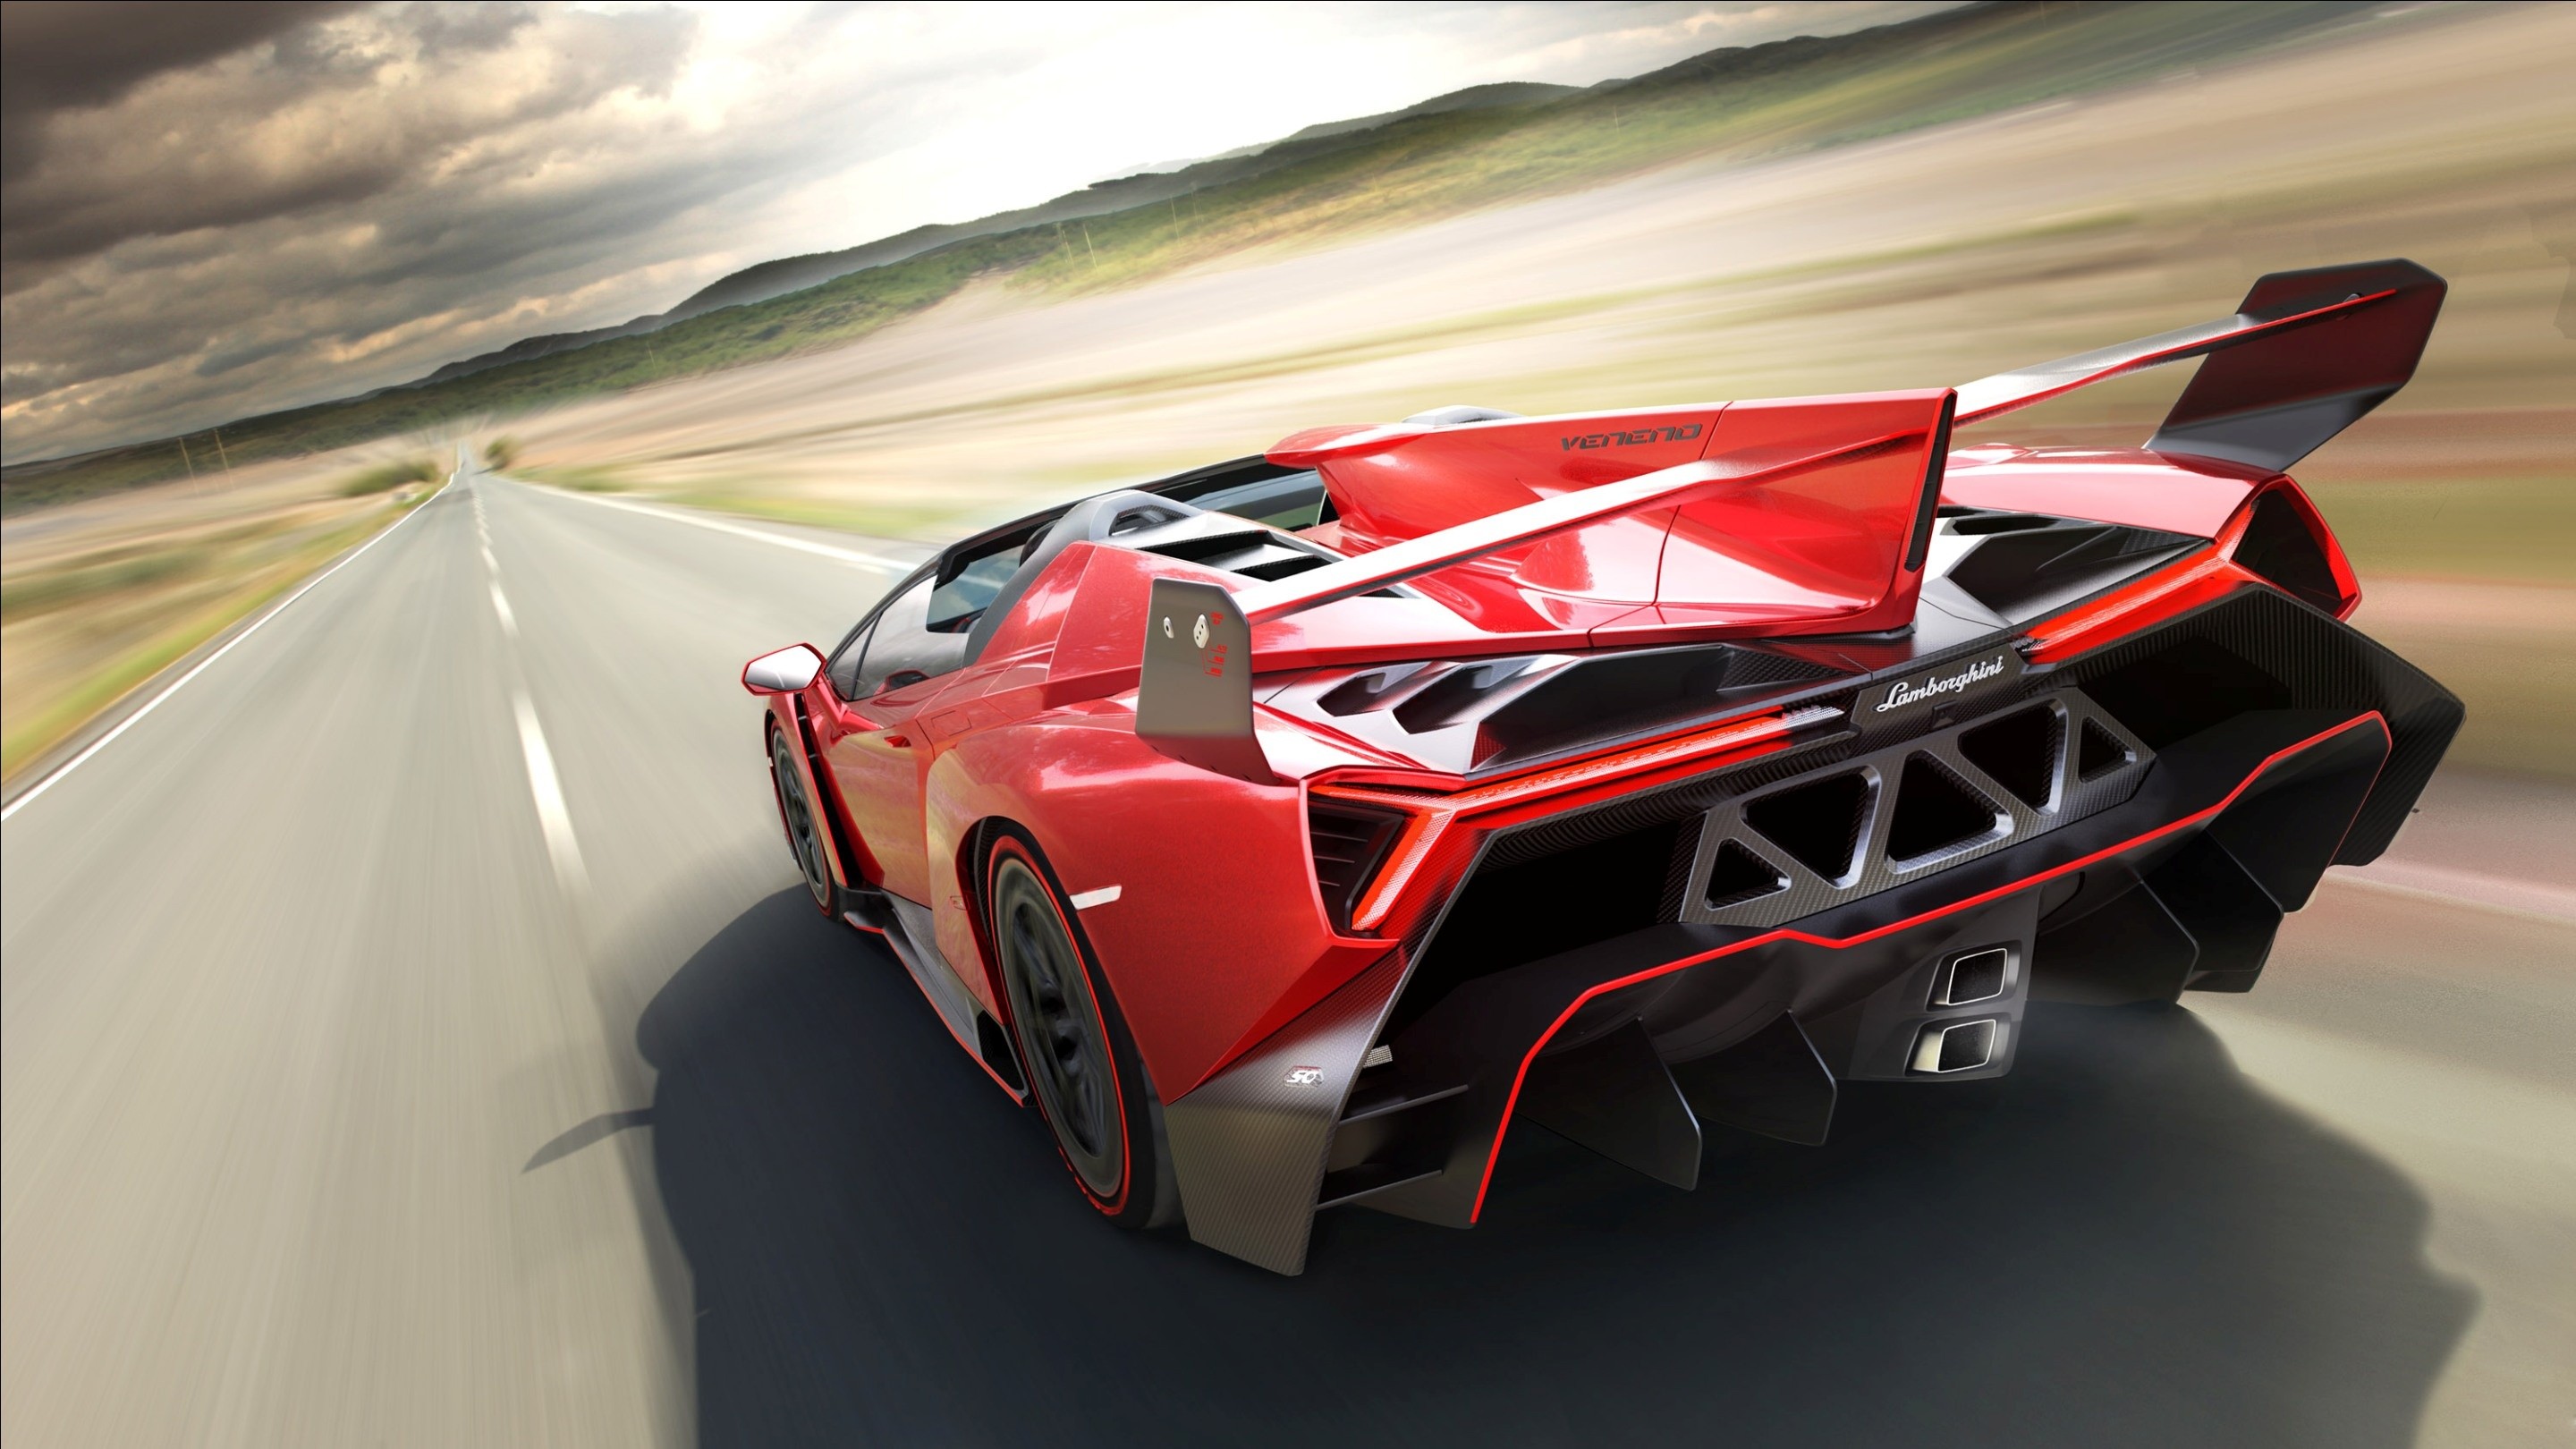 2880x1620 Images Cool Car Wallpaper High Quality